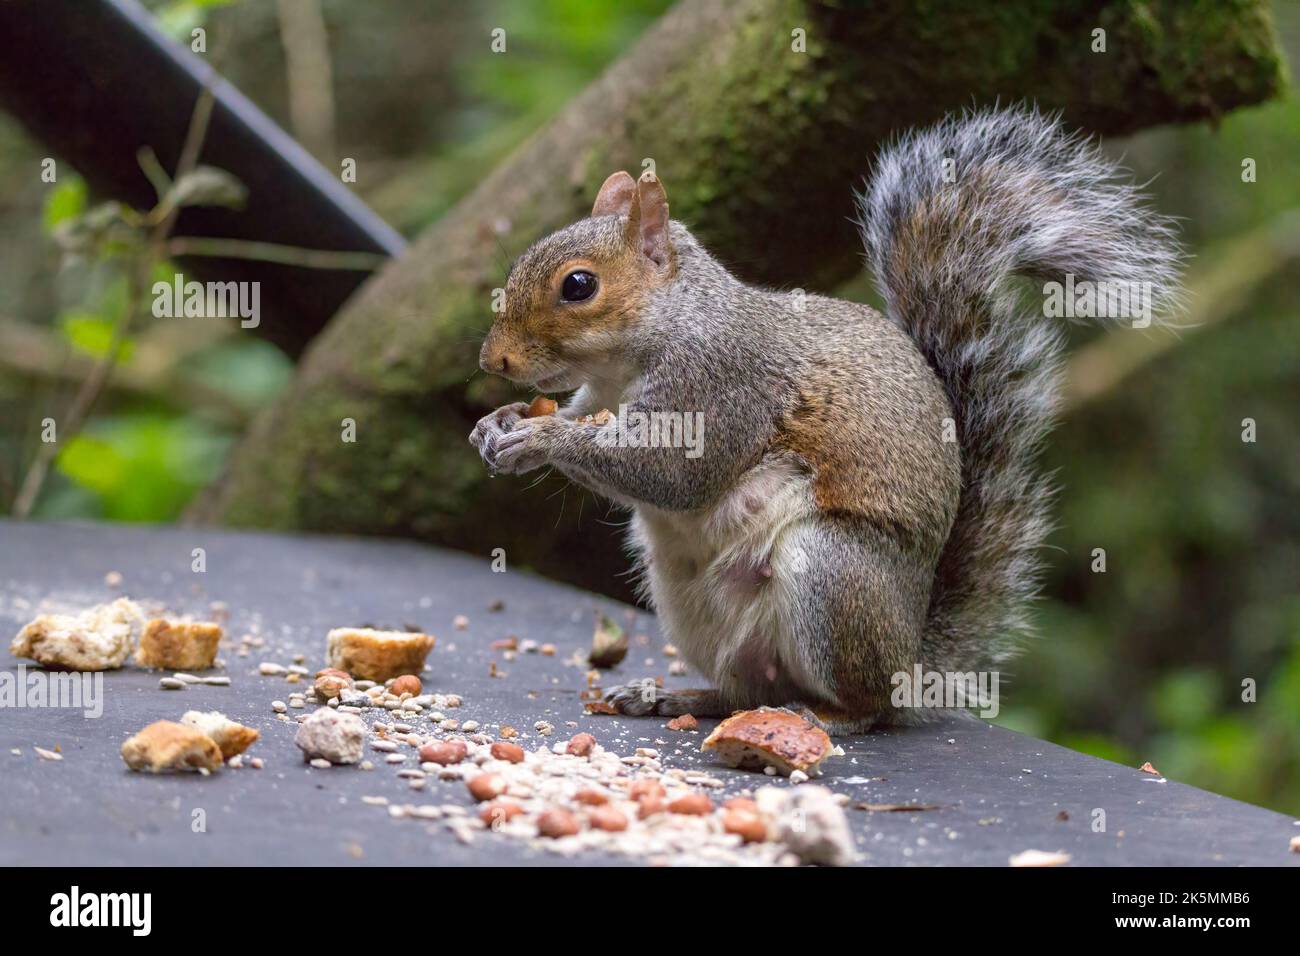 Squirrel grey (sciurus carolinesis) feeding at a small hide on mixed seed nuts and bread put out for birds. Grey and reddish fur with large bushy tail Stock Photo